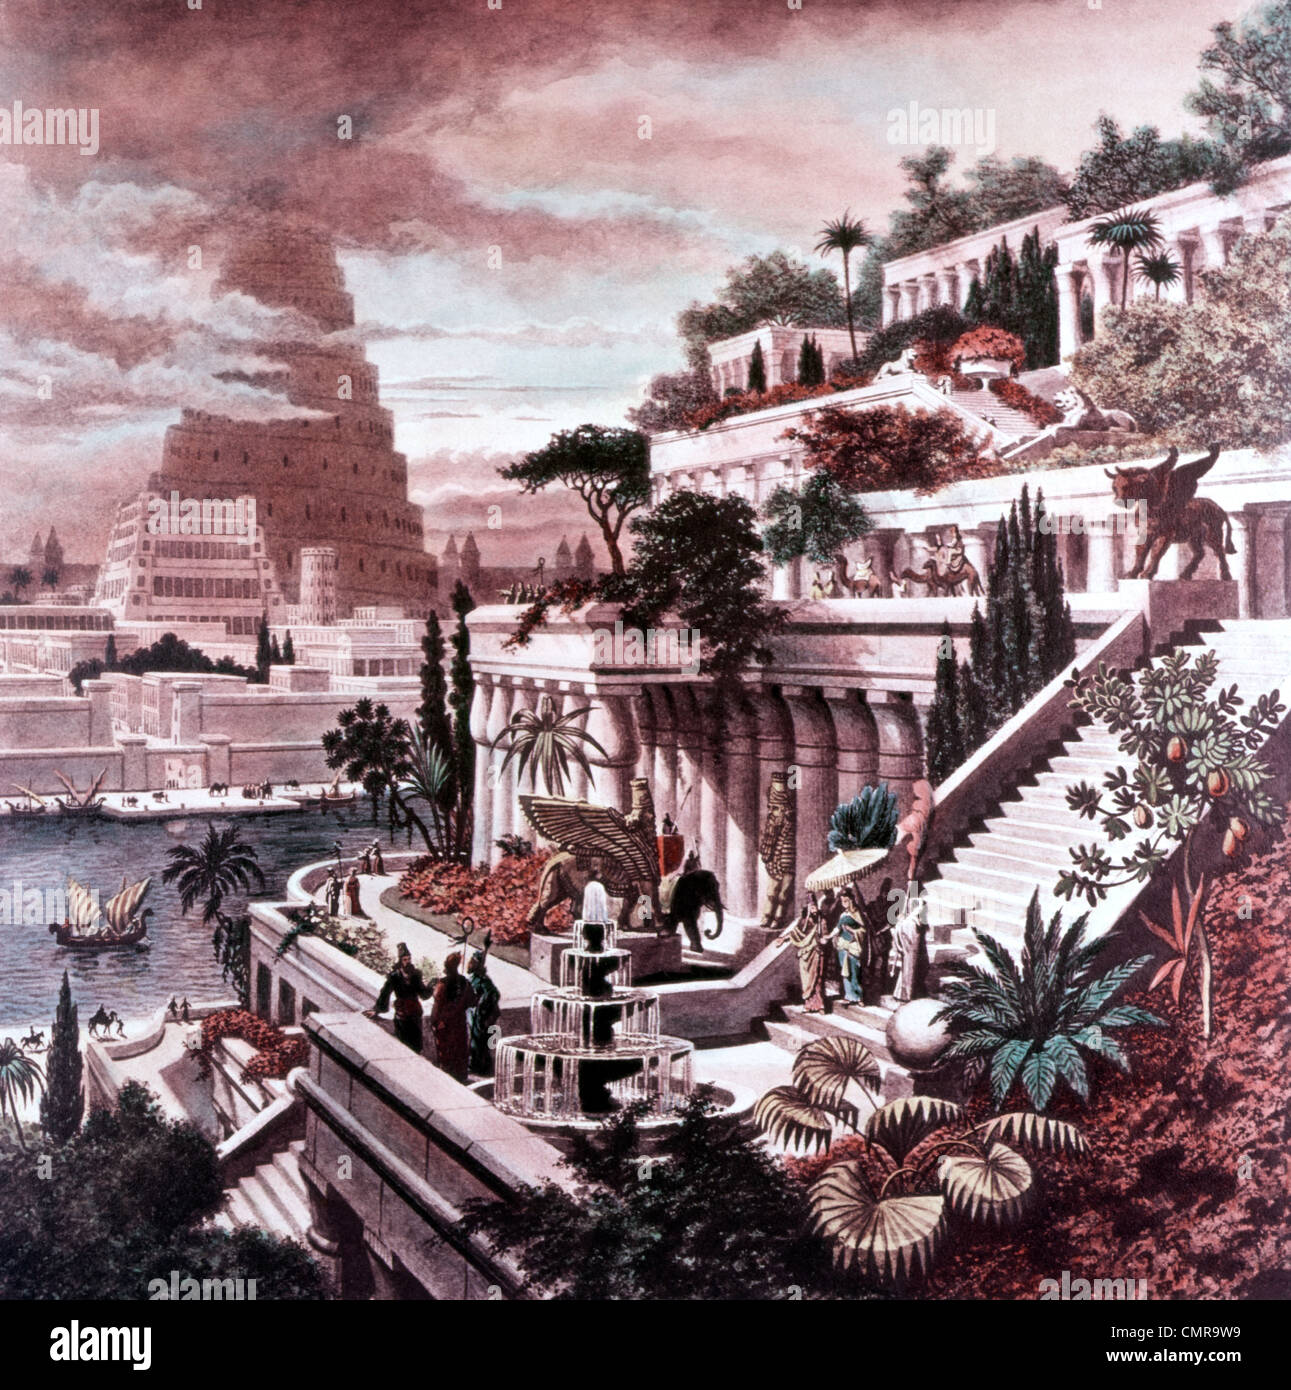 ILLUSTRATION SEVEN WONDERS OF THE ANCIENT WORLD 600 BC HANGING GARDENS OF BABYLON & TOWER OF BABEL BY MARTIN HEEMSKERCK Stock Photo